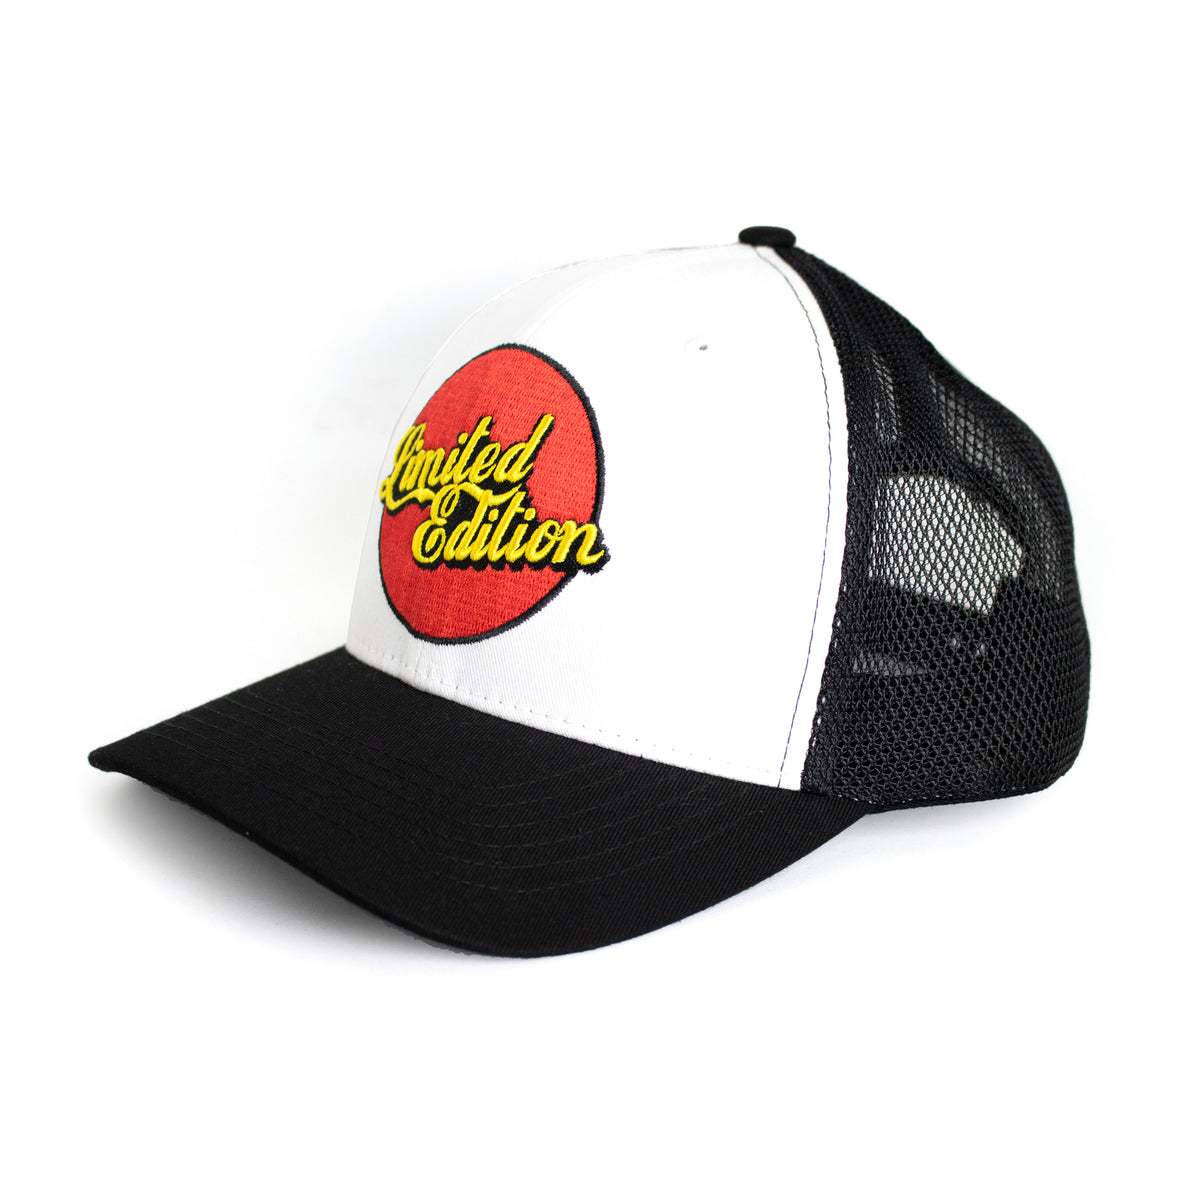 Limited Edition NEW DAWN Snap Back Trucker Hat - Nomad Bodyboards